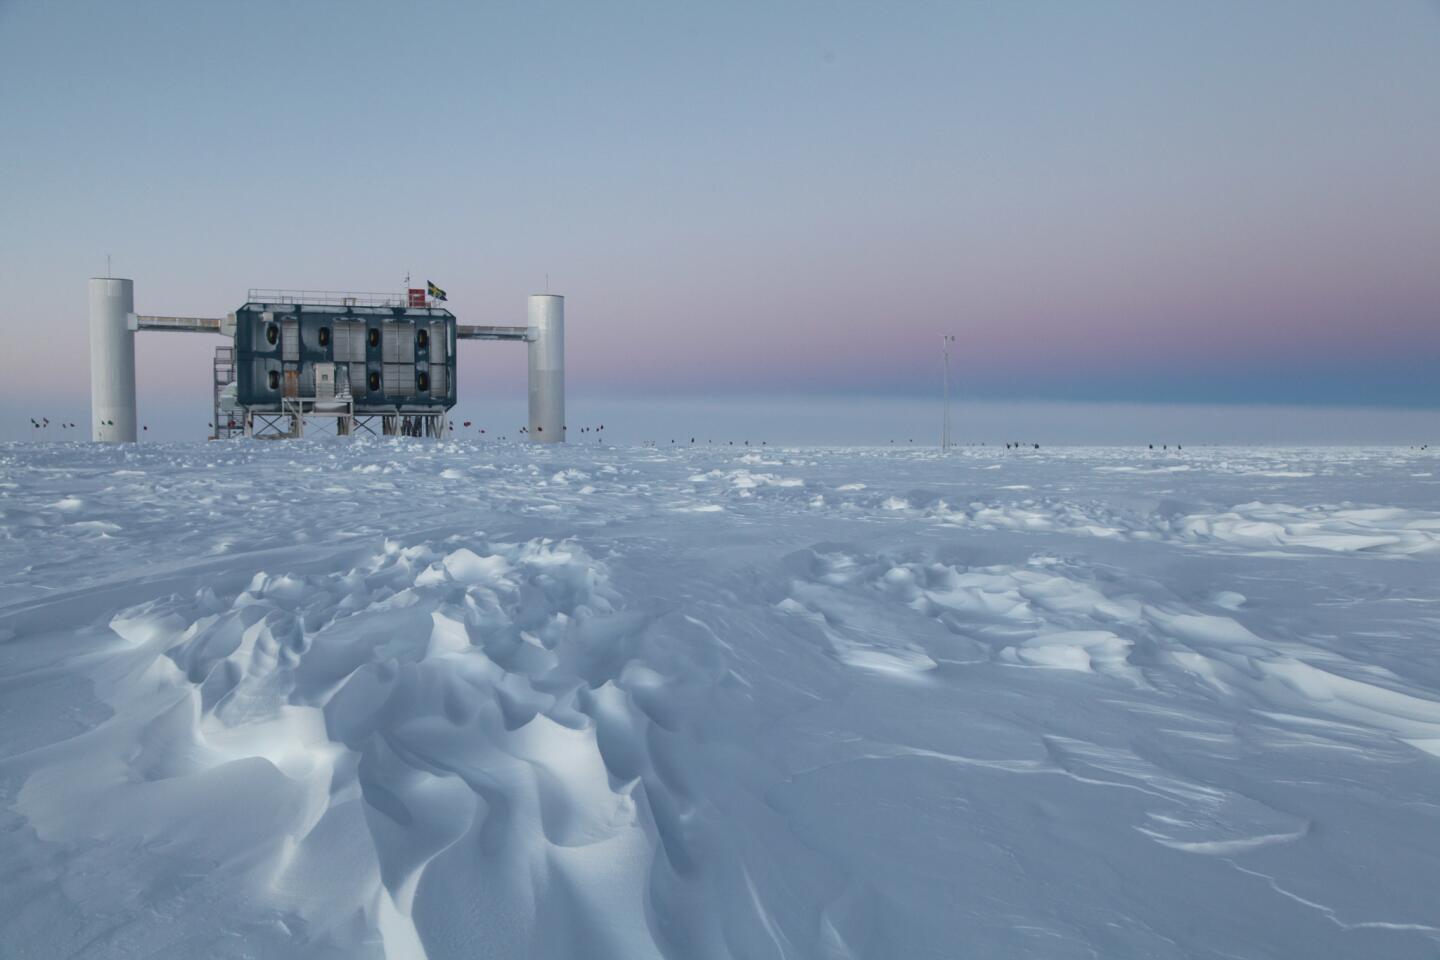 The IceCube Neutrino Observatory at the Amundsen-Scott South Pole station in Antarctica is the world's largest neutrino detector. Its computers collect raw data on neutrino activity from sensors in the ice that look for light emitted when neutrinos strike.